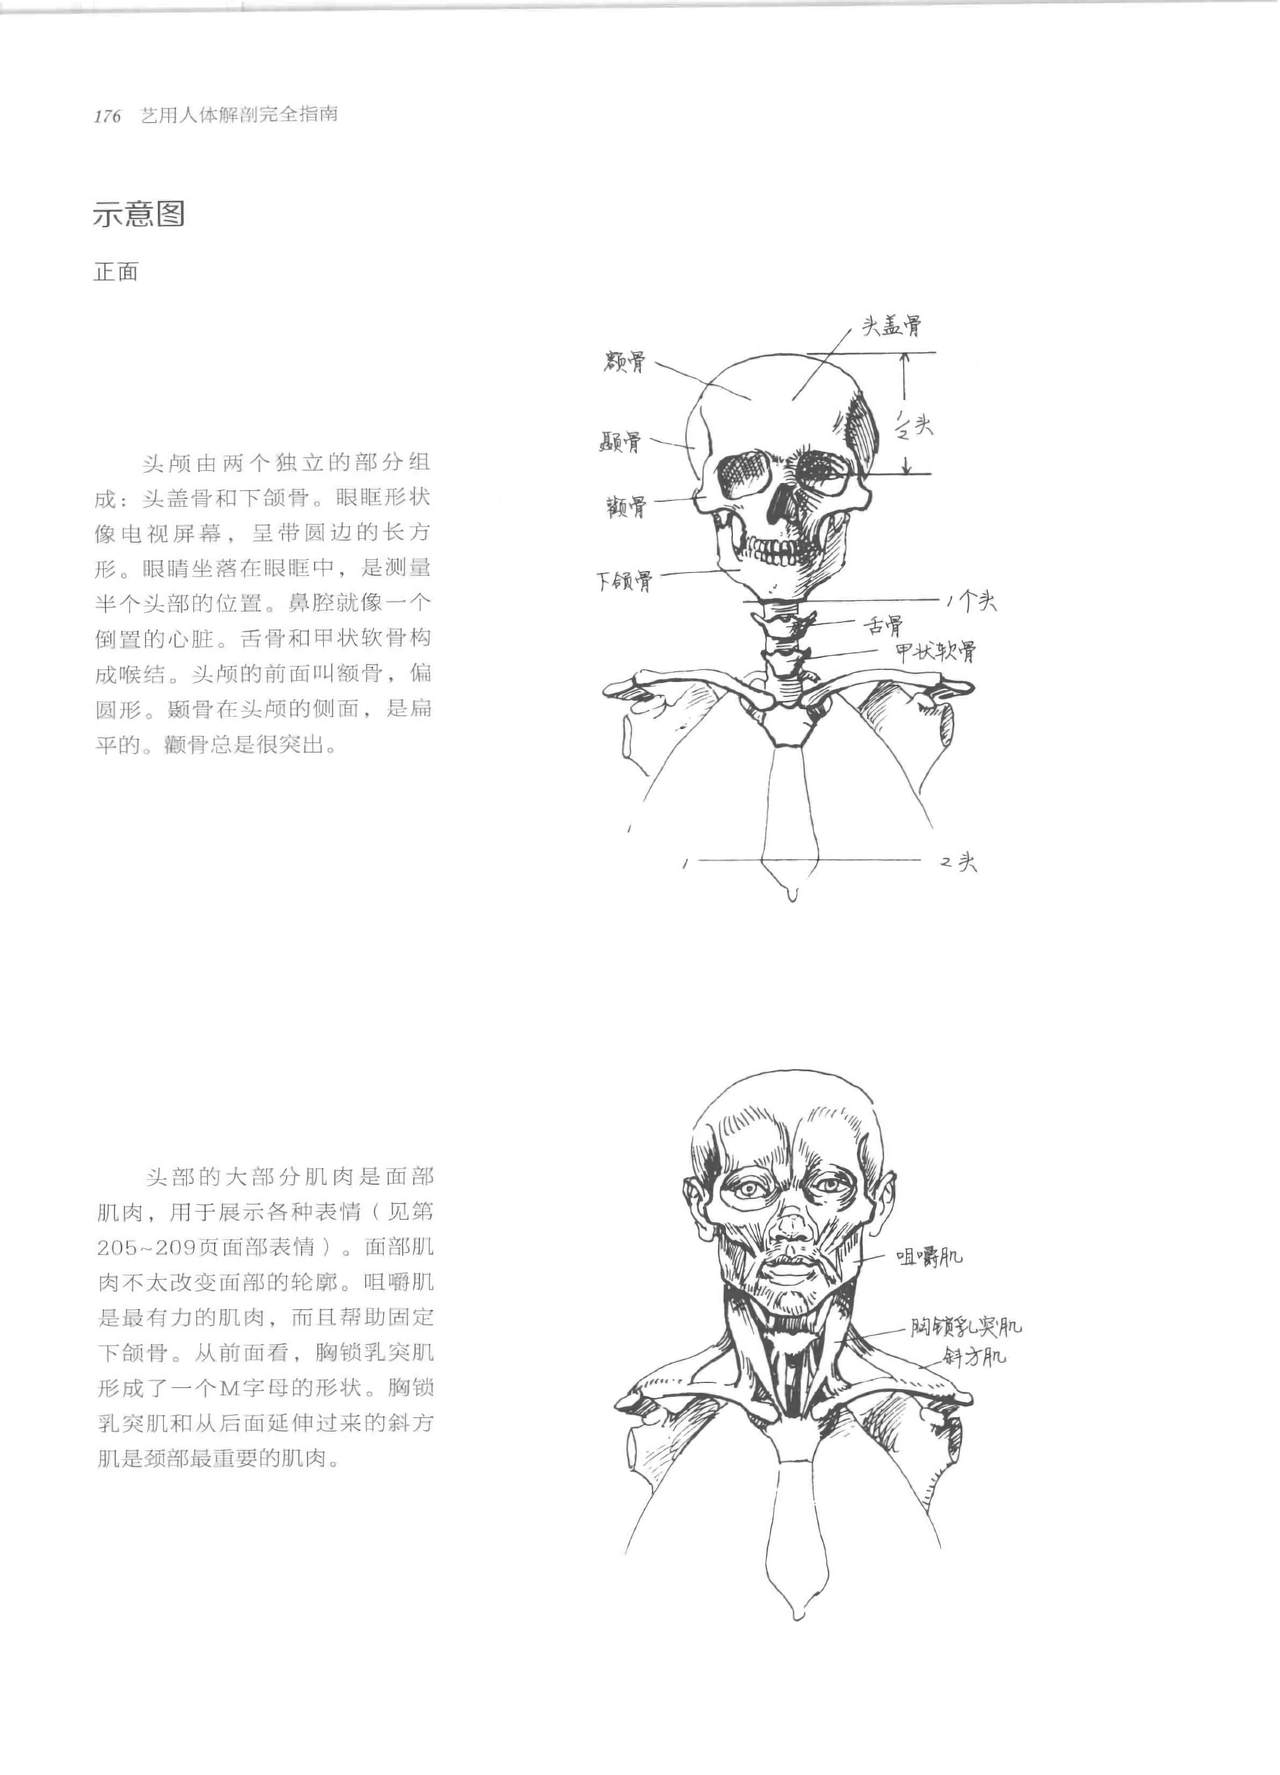 Anatomy-A Complete Guide for Artists - Joseph Sheppard [Chinese] 176